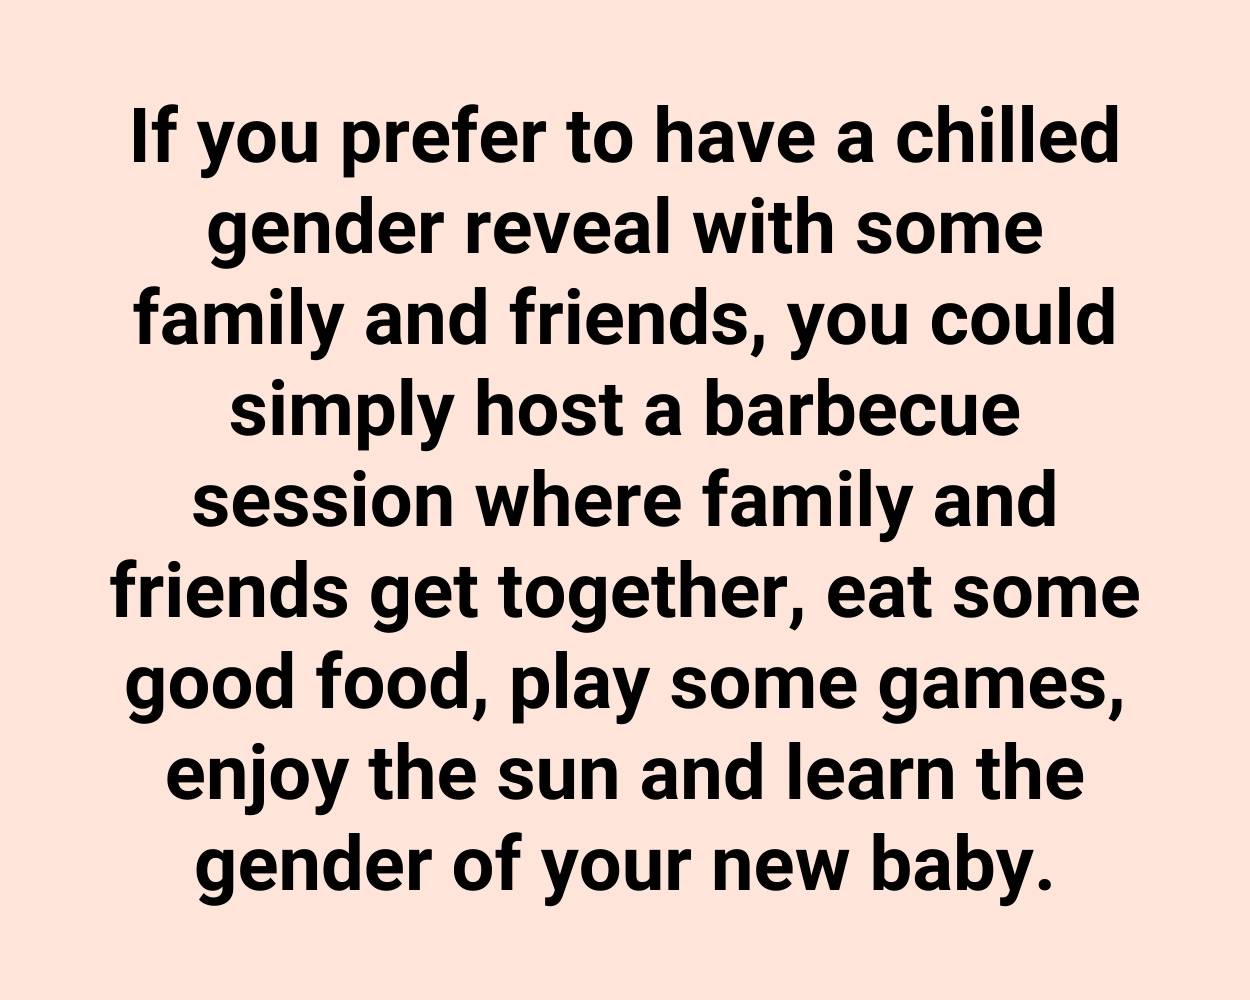 If you prefer to have a chilled gender reveal with some family and friends, you could simply host a barbecue session where family and friends get together, eat some good food, play some games, enjoy the sun and learn the gender of your new baby.